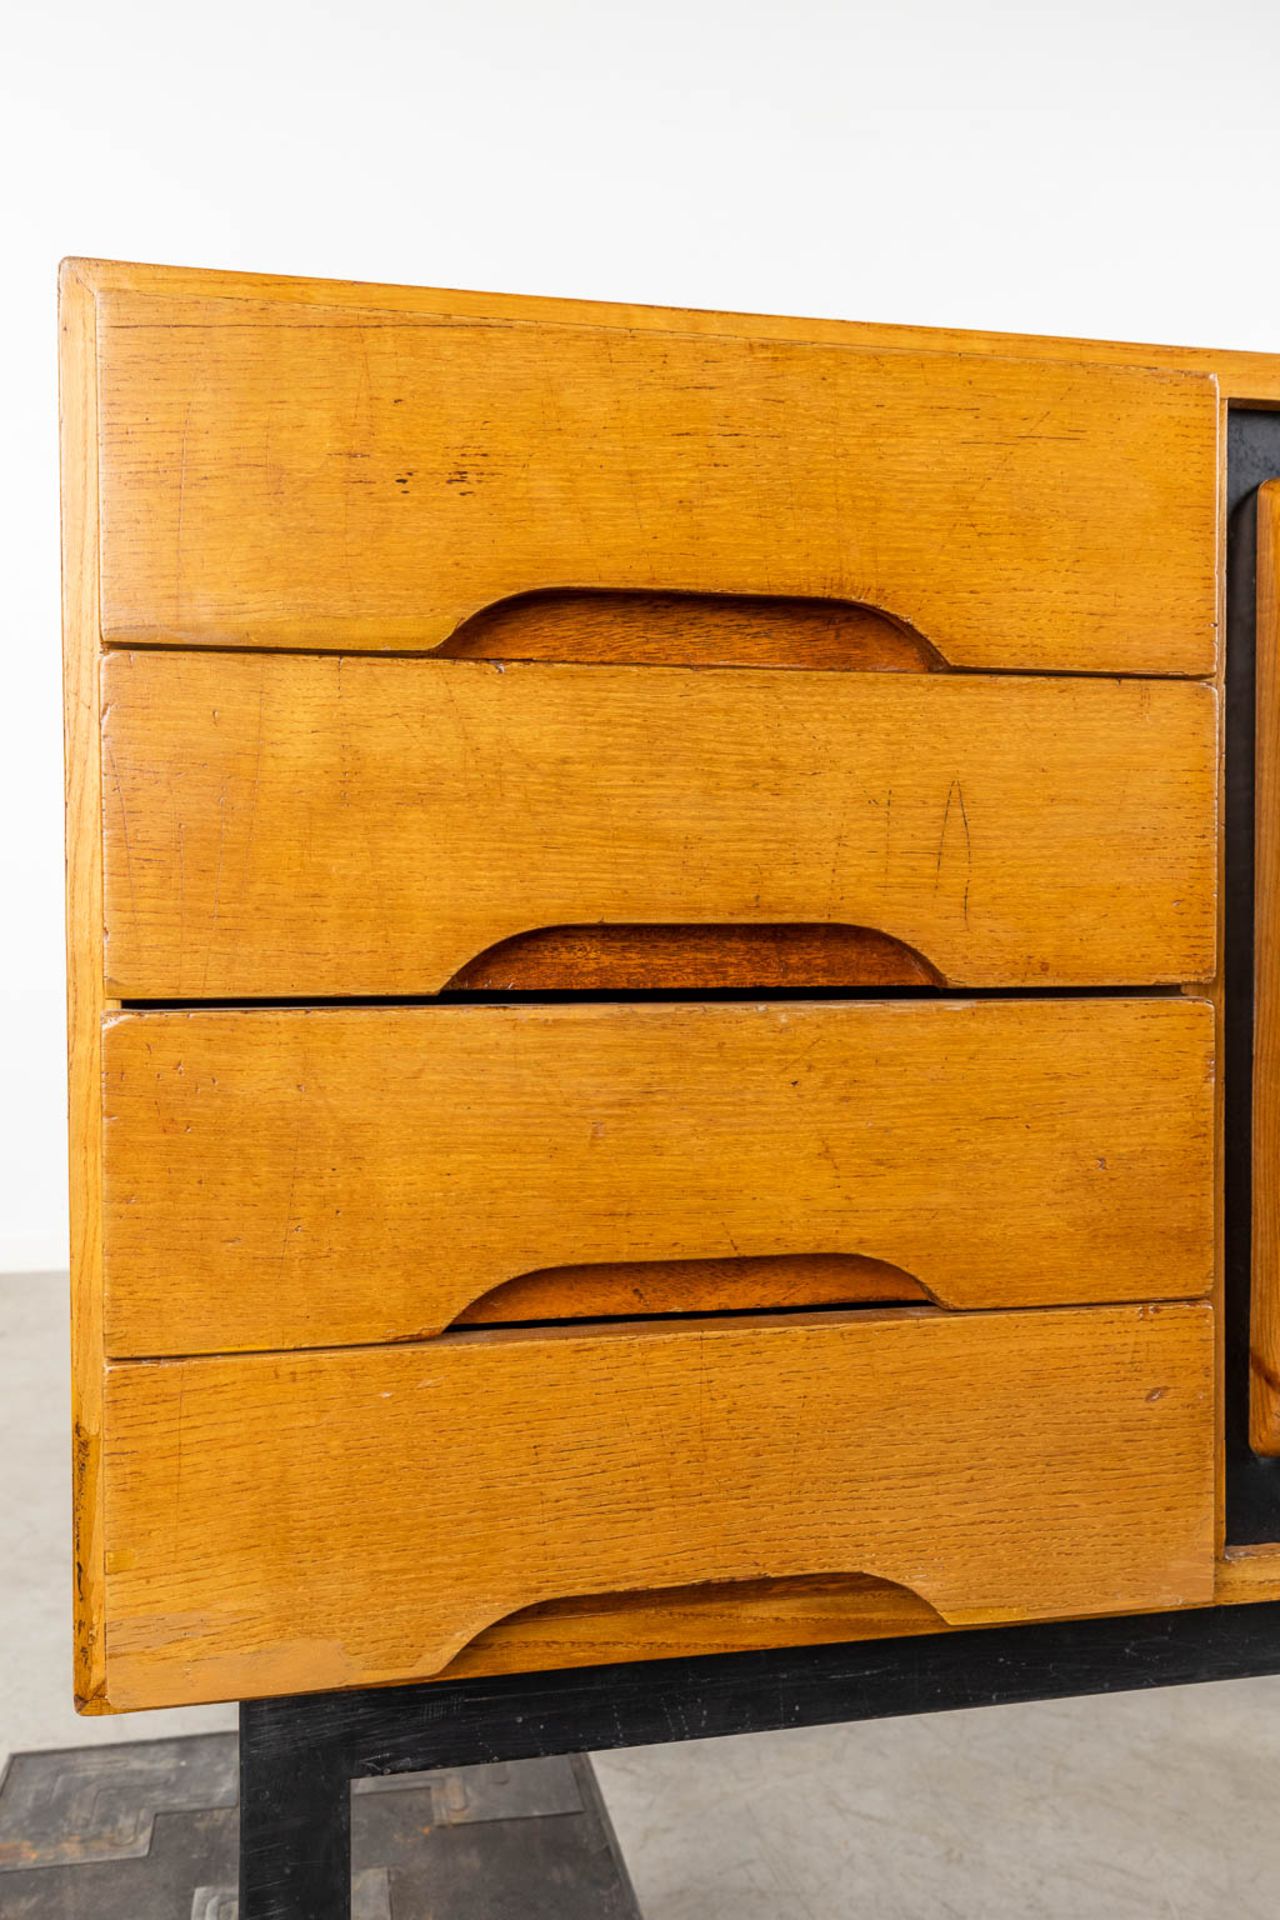 Charlotte PERRIAND (1903-1999) 'Cansado' a sideboard (D:47 x W:158 x H:73 cm) - Image 14 of 16